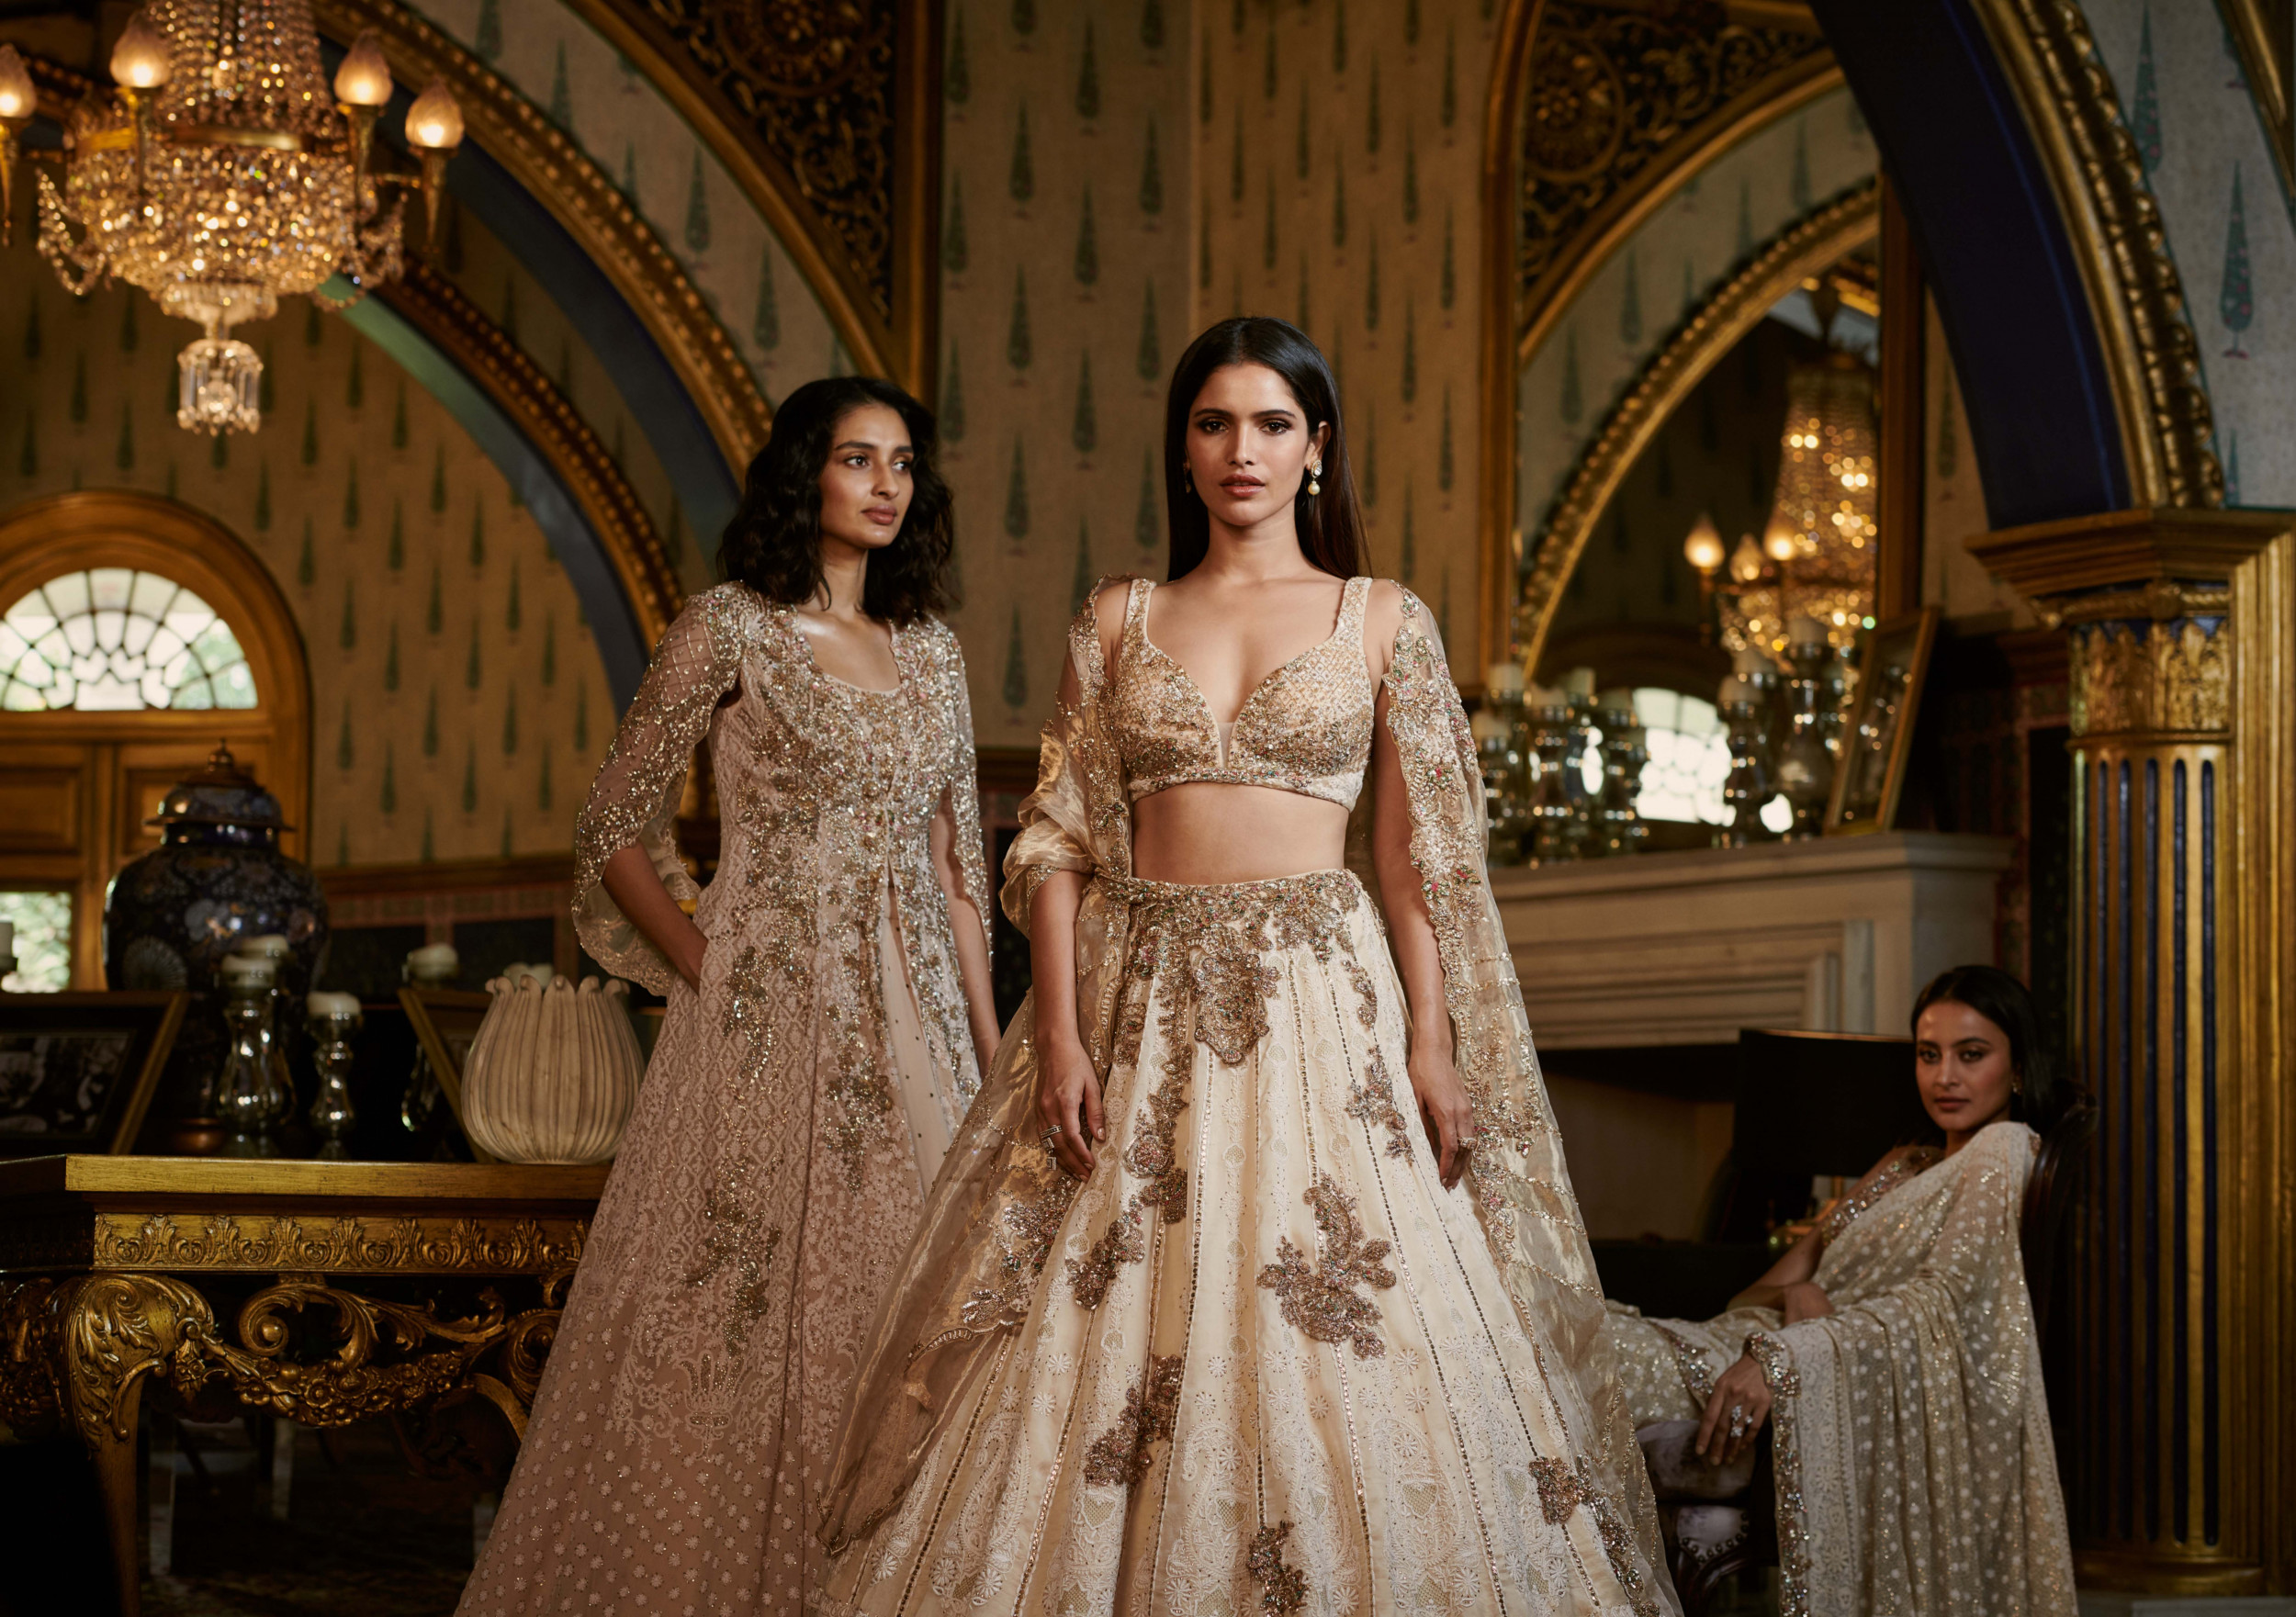 Pandemic Chic: The Big Fat Indian Wedding Gets A Leaner Look